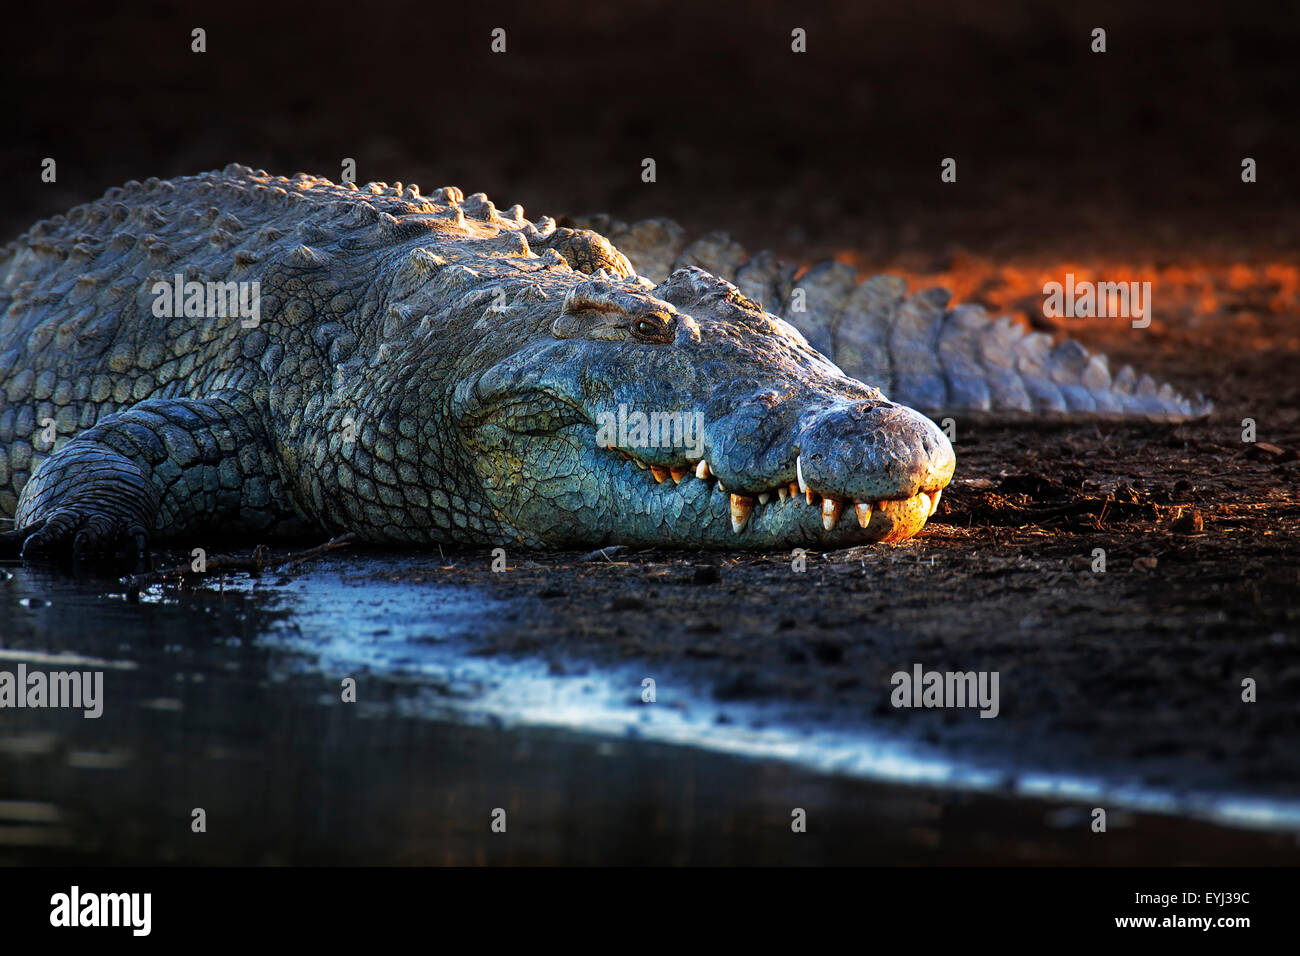 Nile crocodile (crocodylus niloticus) on riverbank with last light of day -Kruger National Park (South Africa) Stock Photo